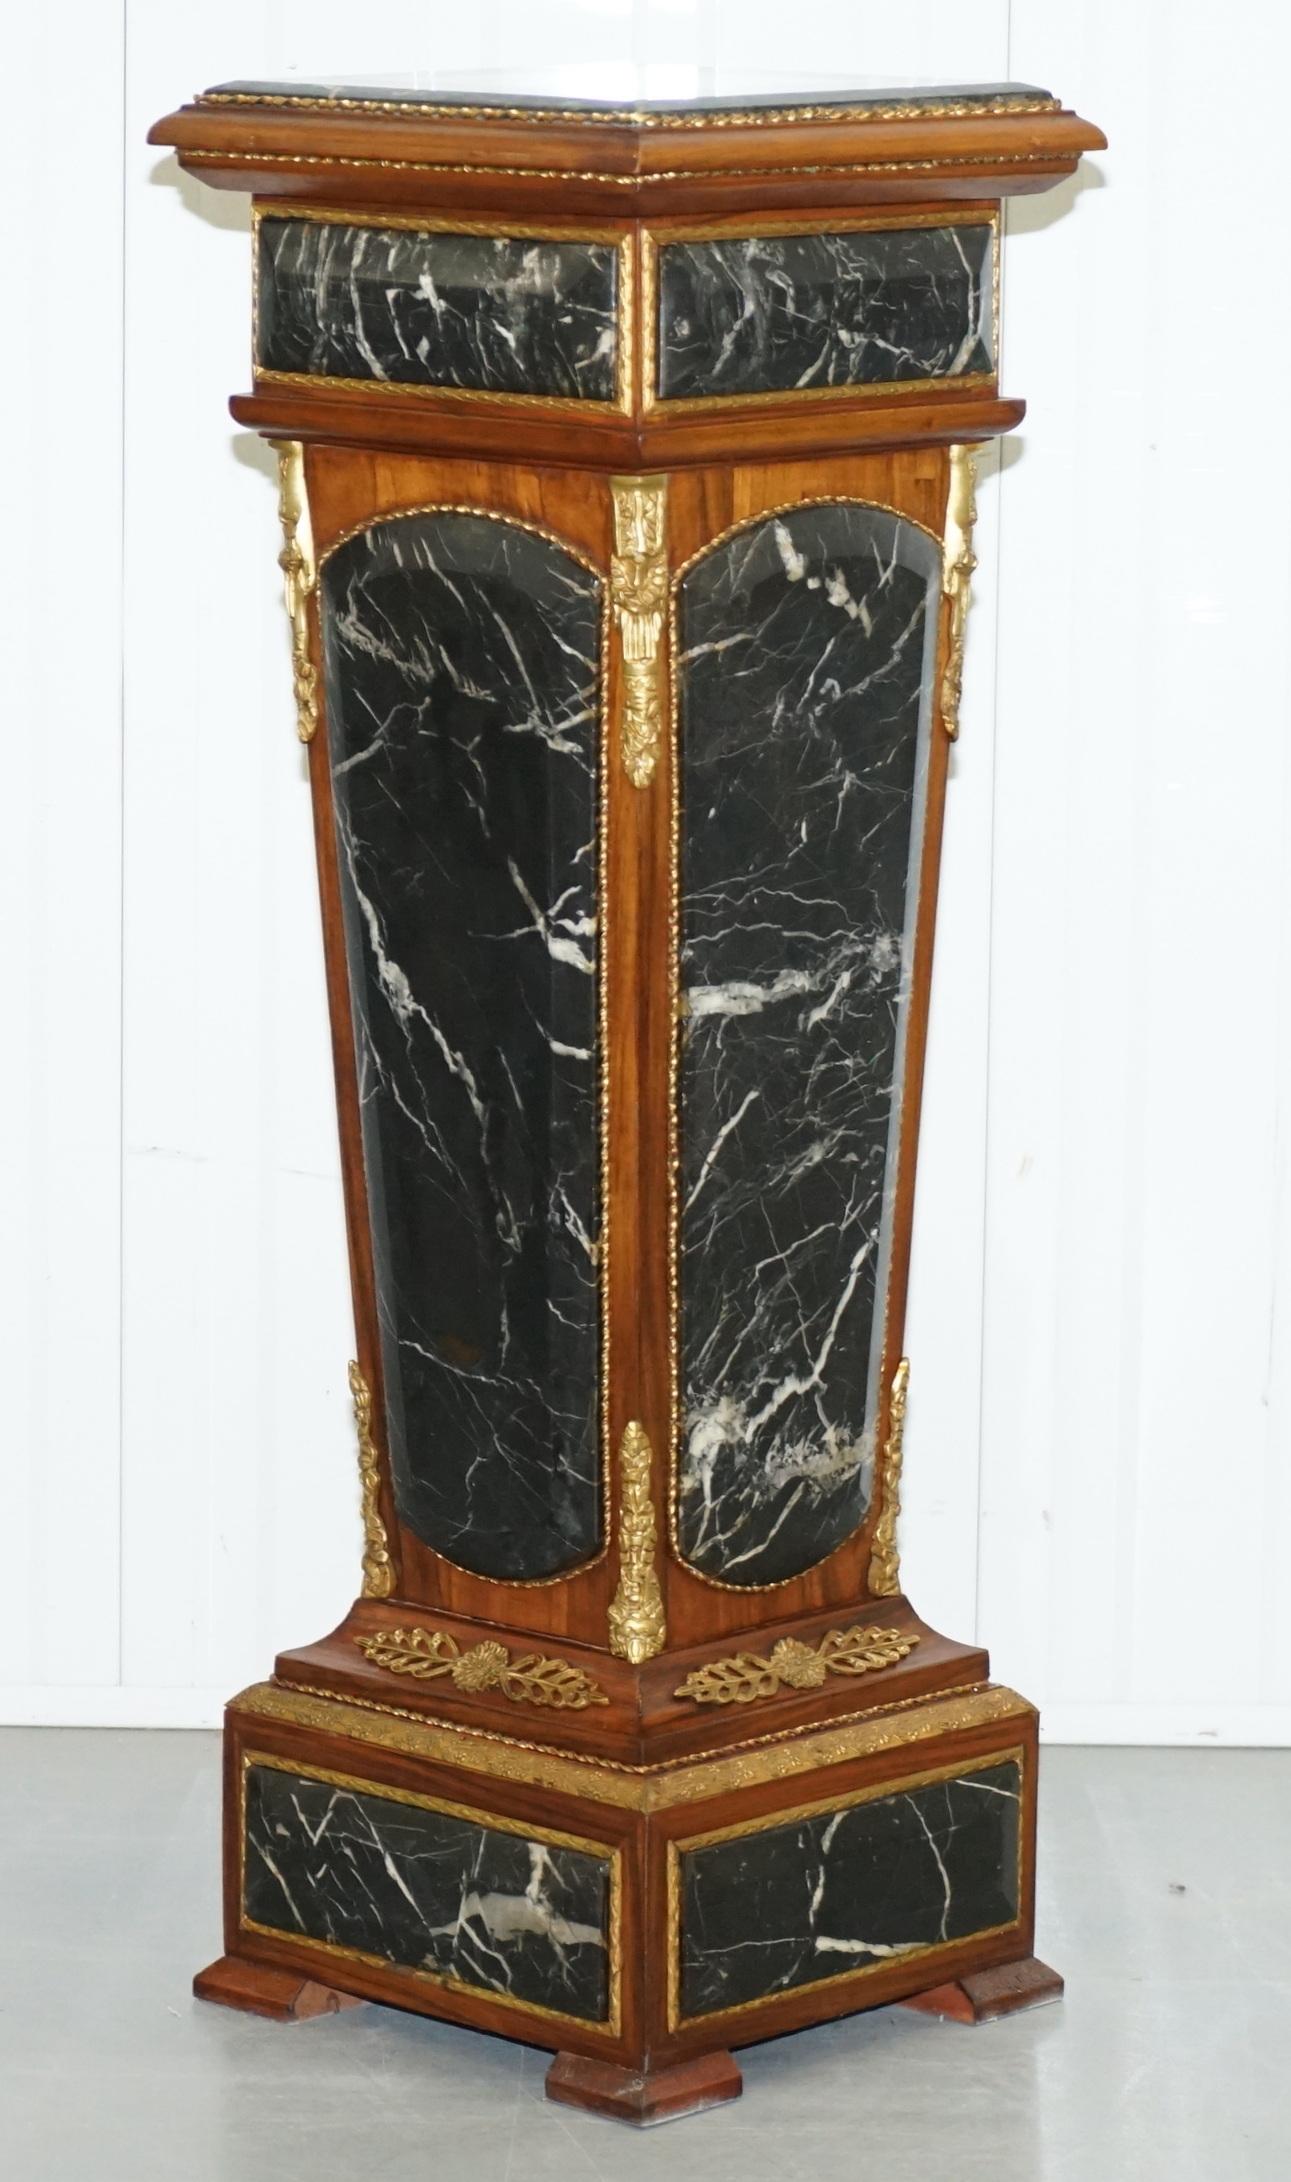 We are delighted to offer for sale this stunning pair of French Empire style heavy marble column pedestals with kingwood veneer and ormolu mounts.

A very good looking, decorative and heavy pair of marble columns, designed to seat busts, statues